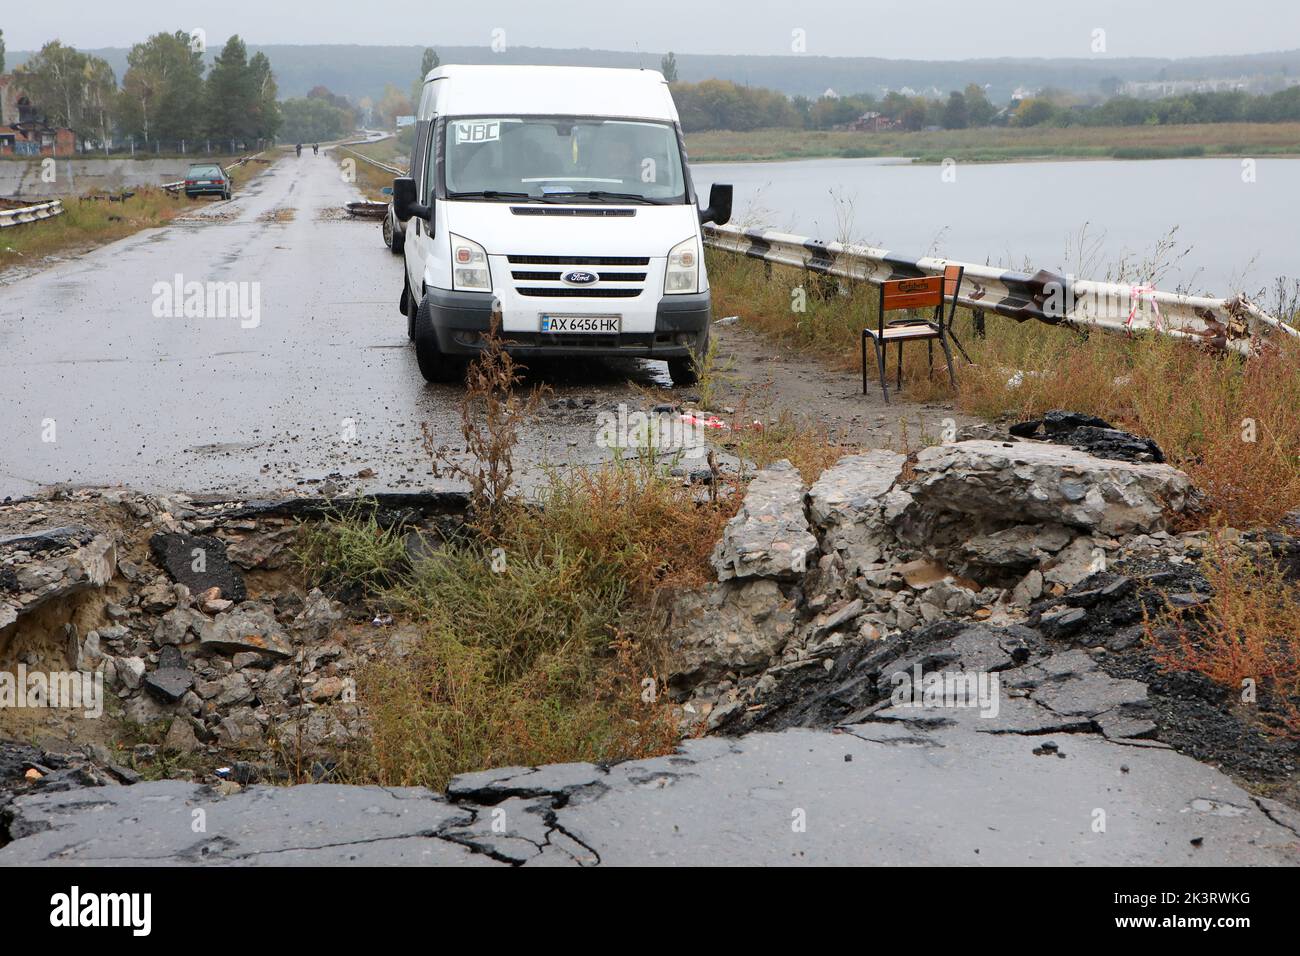 KHARKIV REGION, UKRAINE - SEPTEMBER 27, 2022 - A van is parked at a crater on the bridge across the Pechenihy Reservoir that was destroyed by Ukraine' Stock Photo